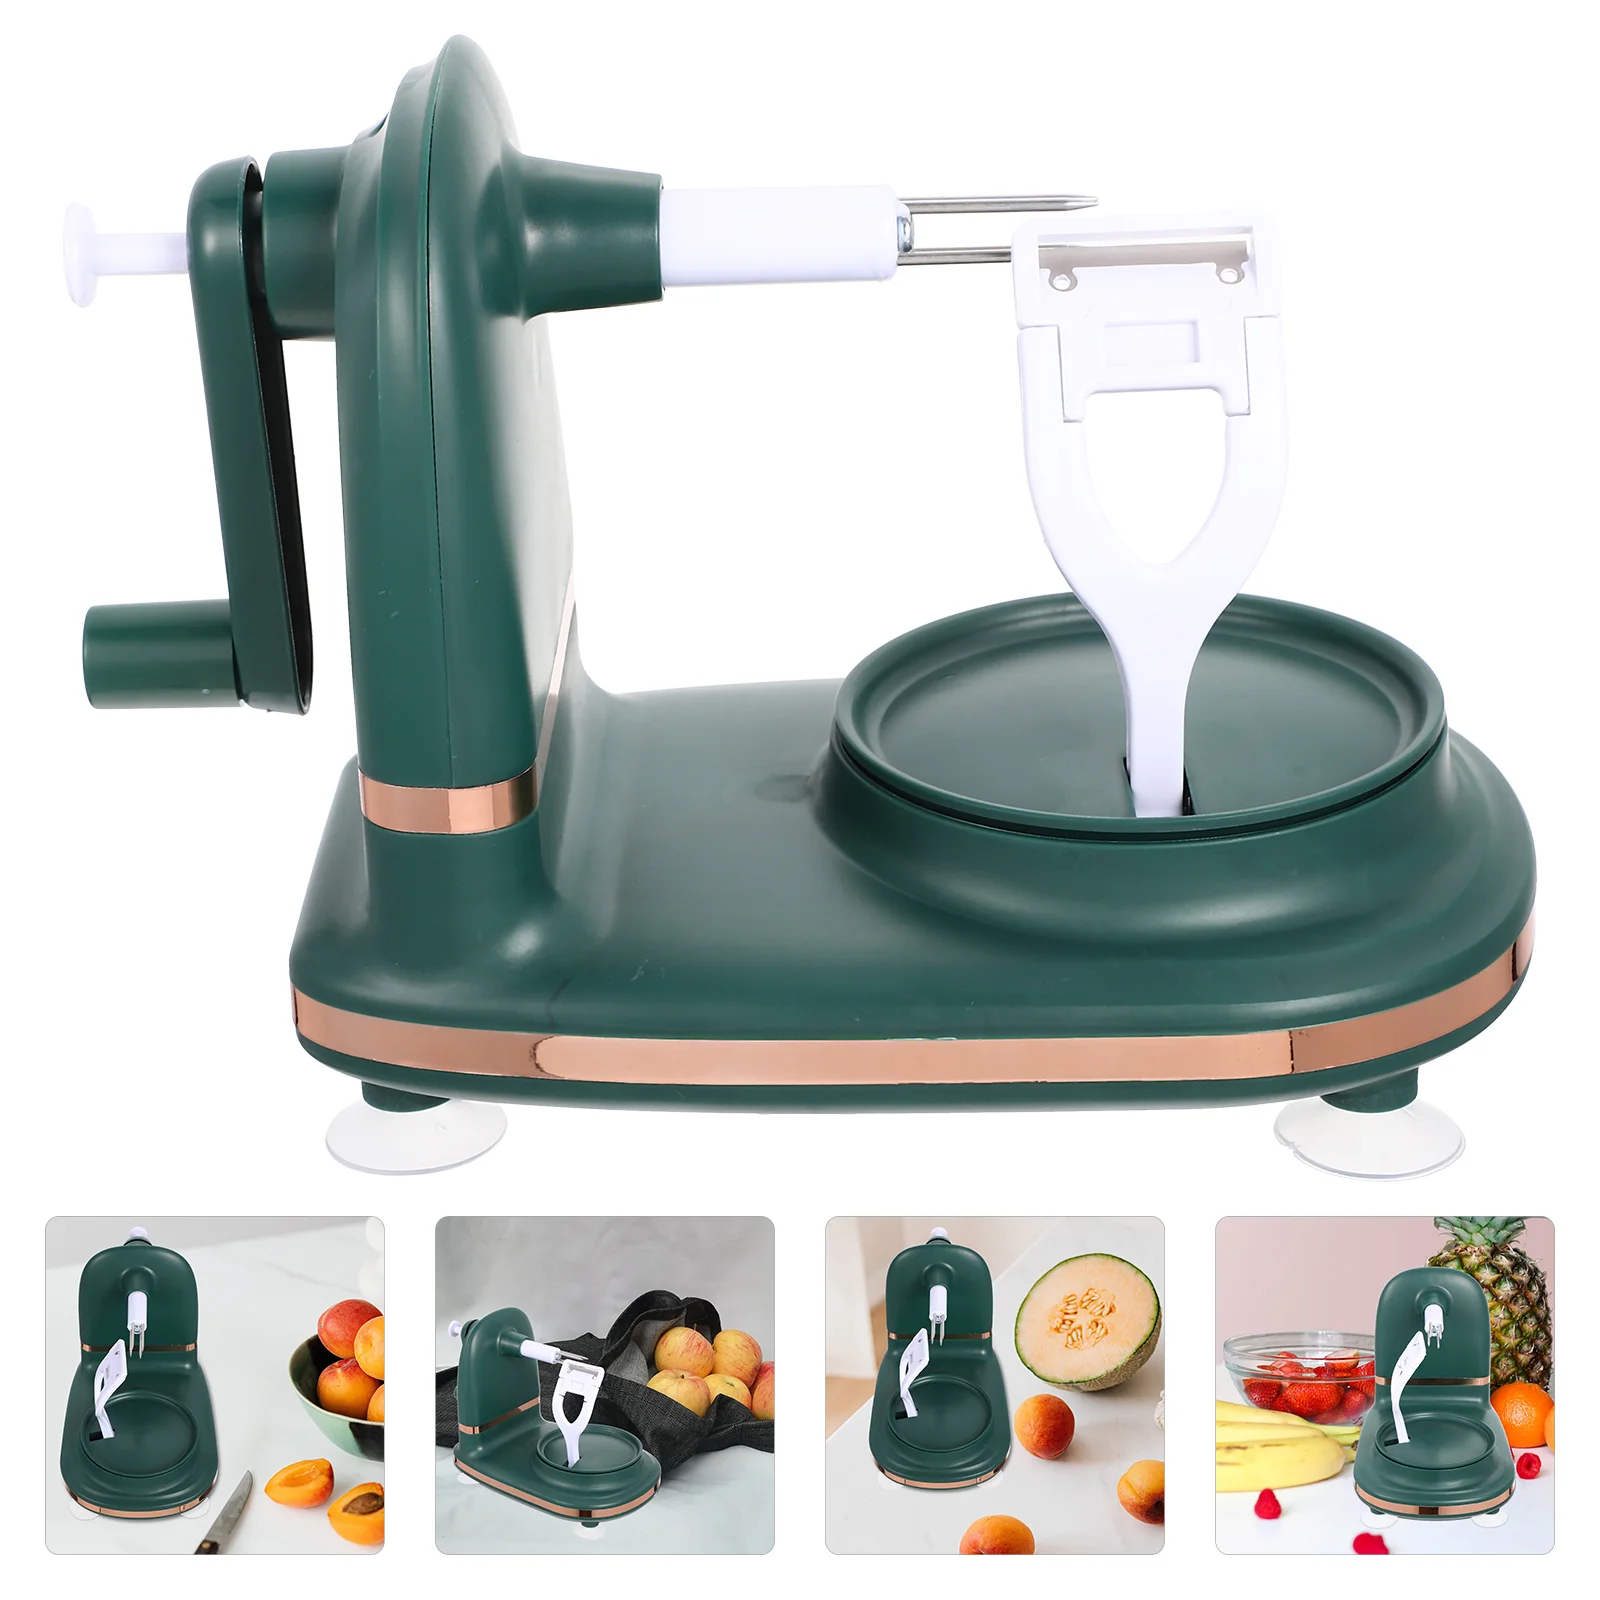 

Fruit Peeler Hand-operated Kitchen Electric Rotary Stainless Steel Manual Abs Convenient Fruits Carrot Home gadgets